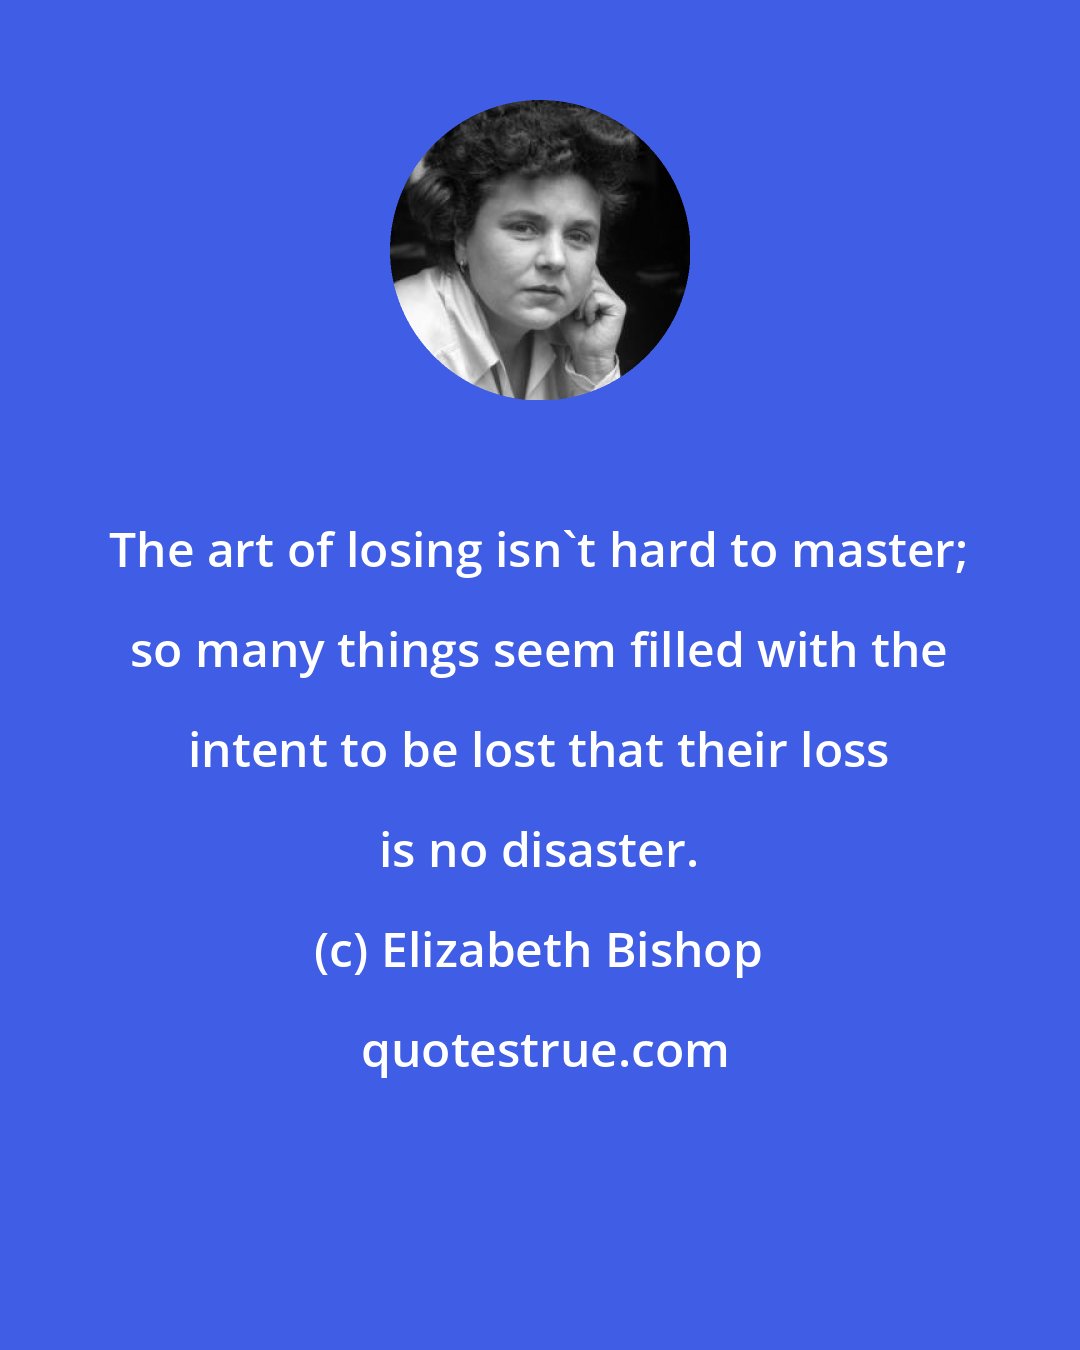 Elizabeth Bishop: The art of losing isn't hard to master; so many things seem filled with the intent to be lost that their loss is no disaster.